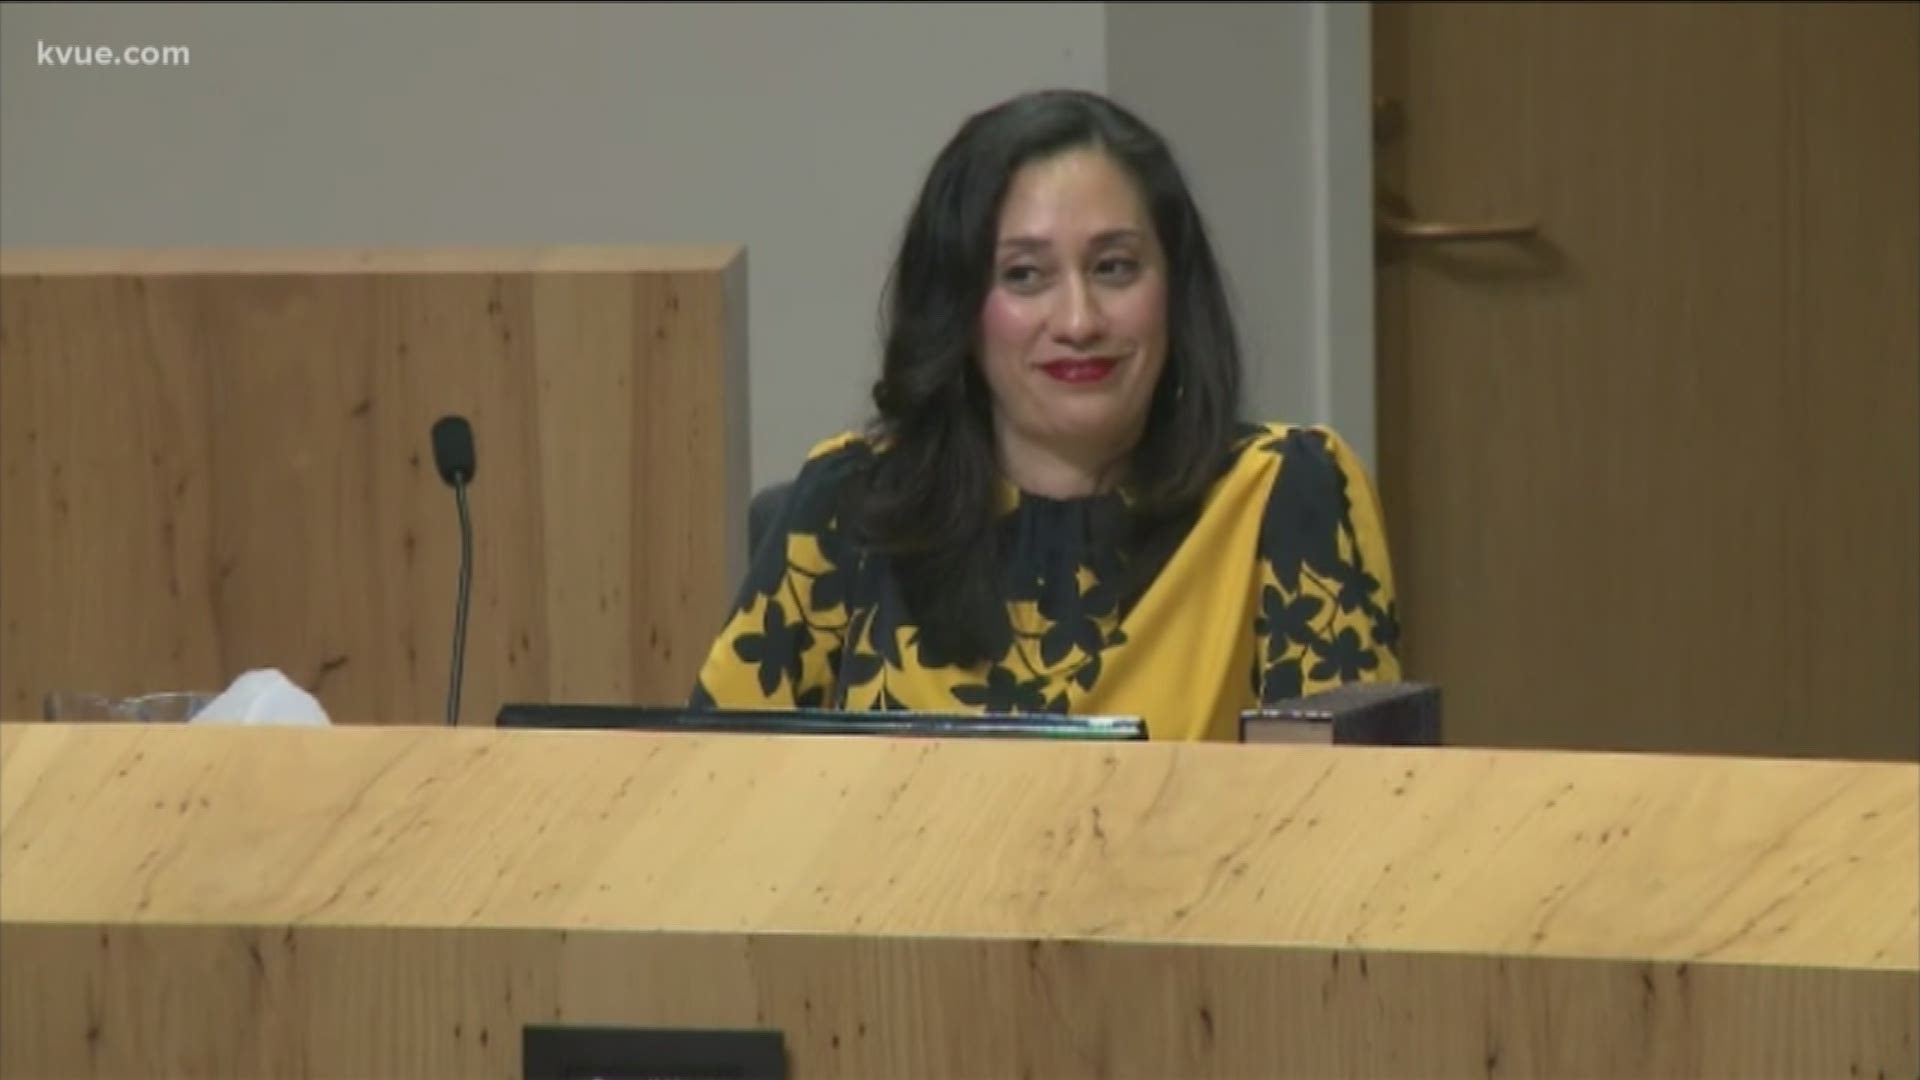 The Austin City Council on Monday elected its first Latina pro tem, Delia Garza.